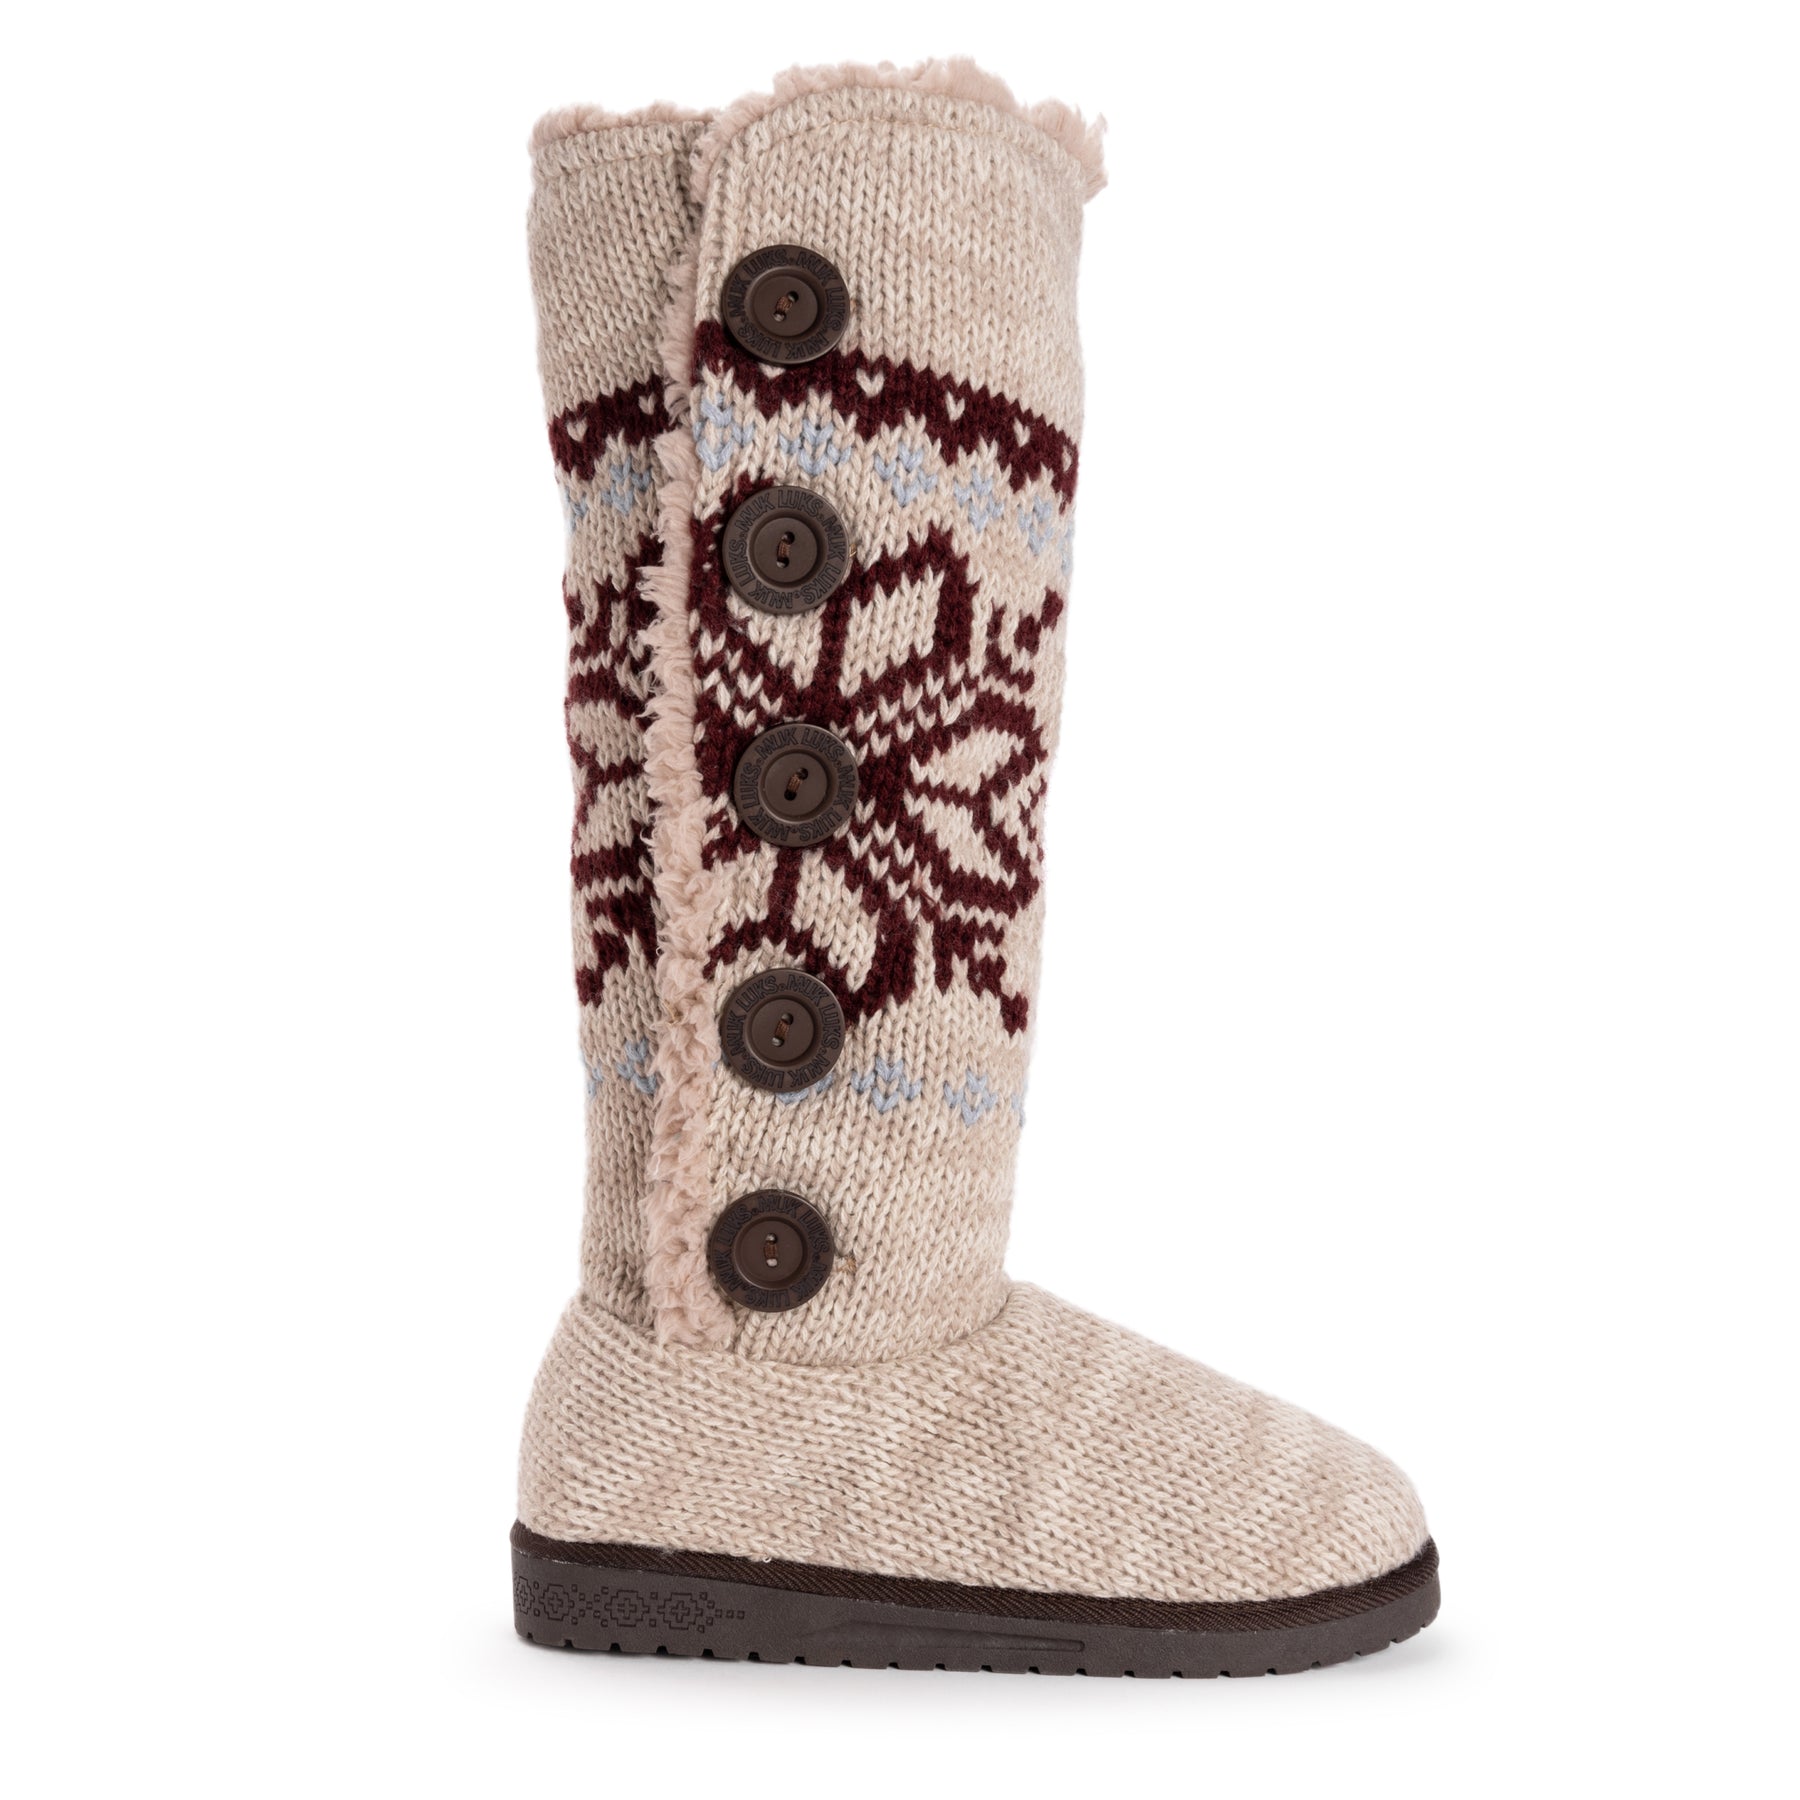 Muk Luks Boots Sale - Check Out these Deals with FREE Shipping!